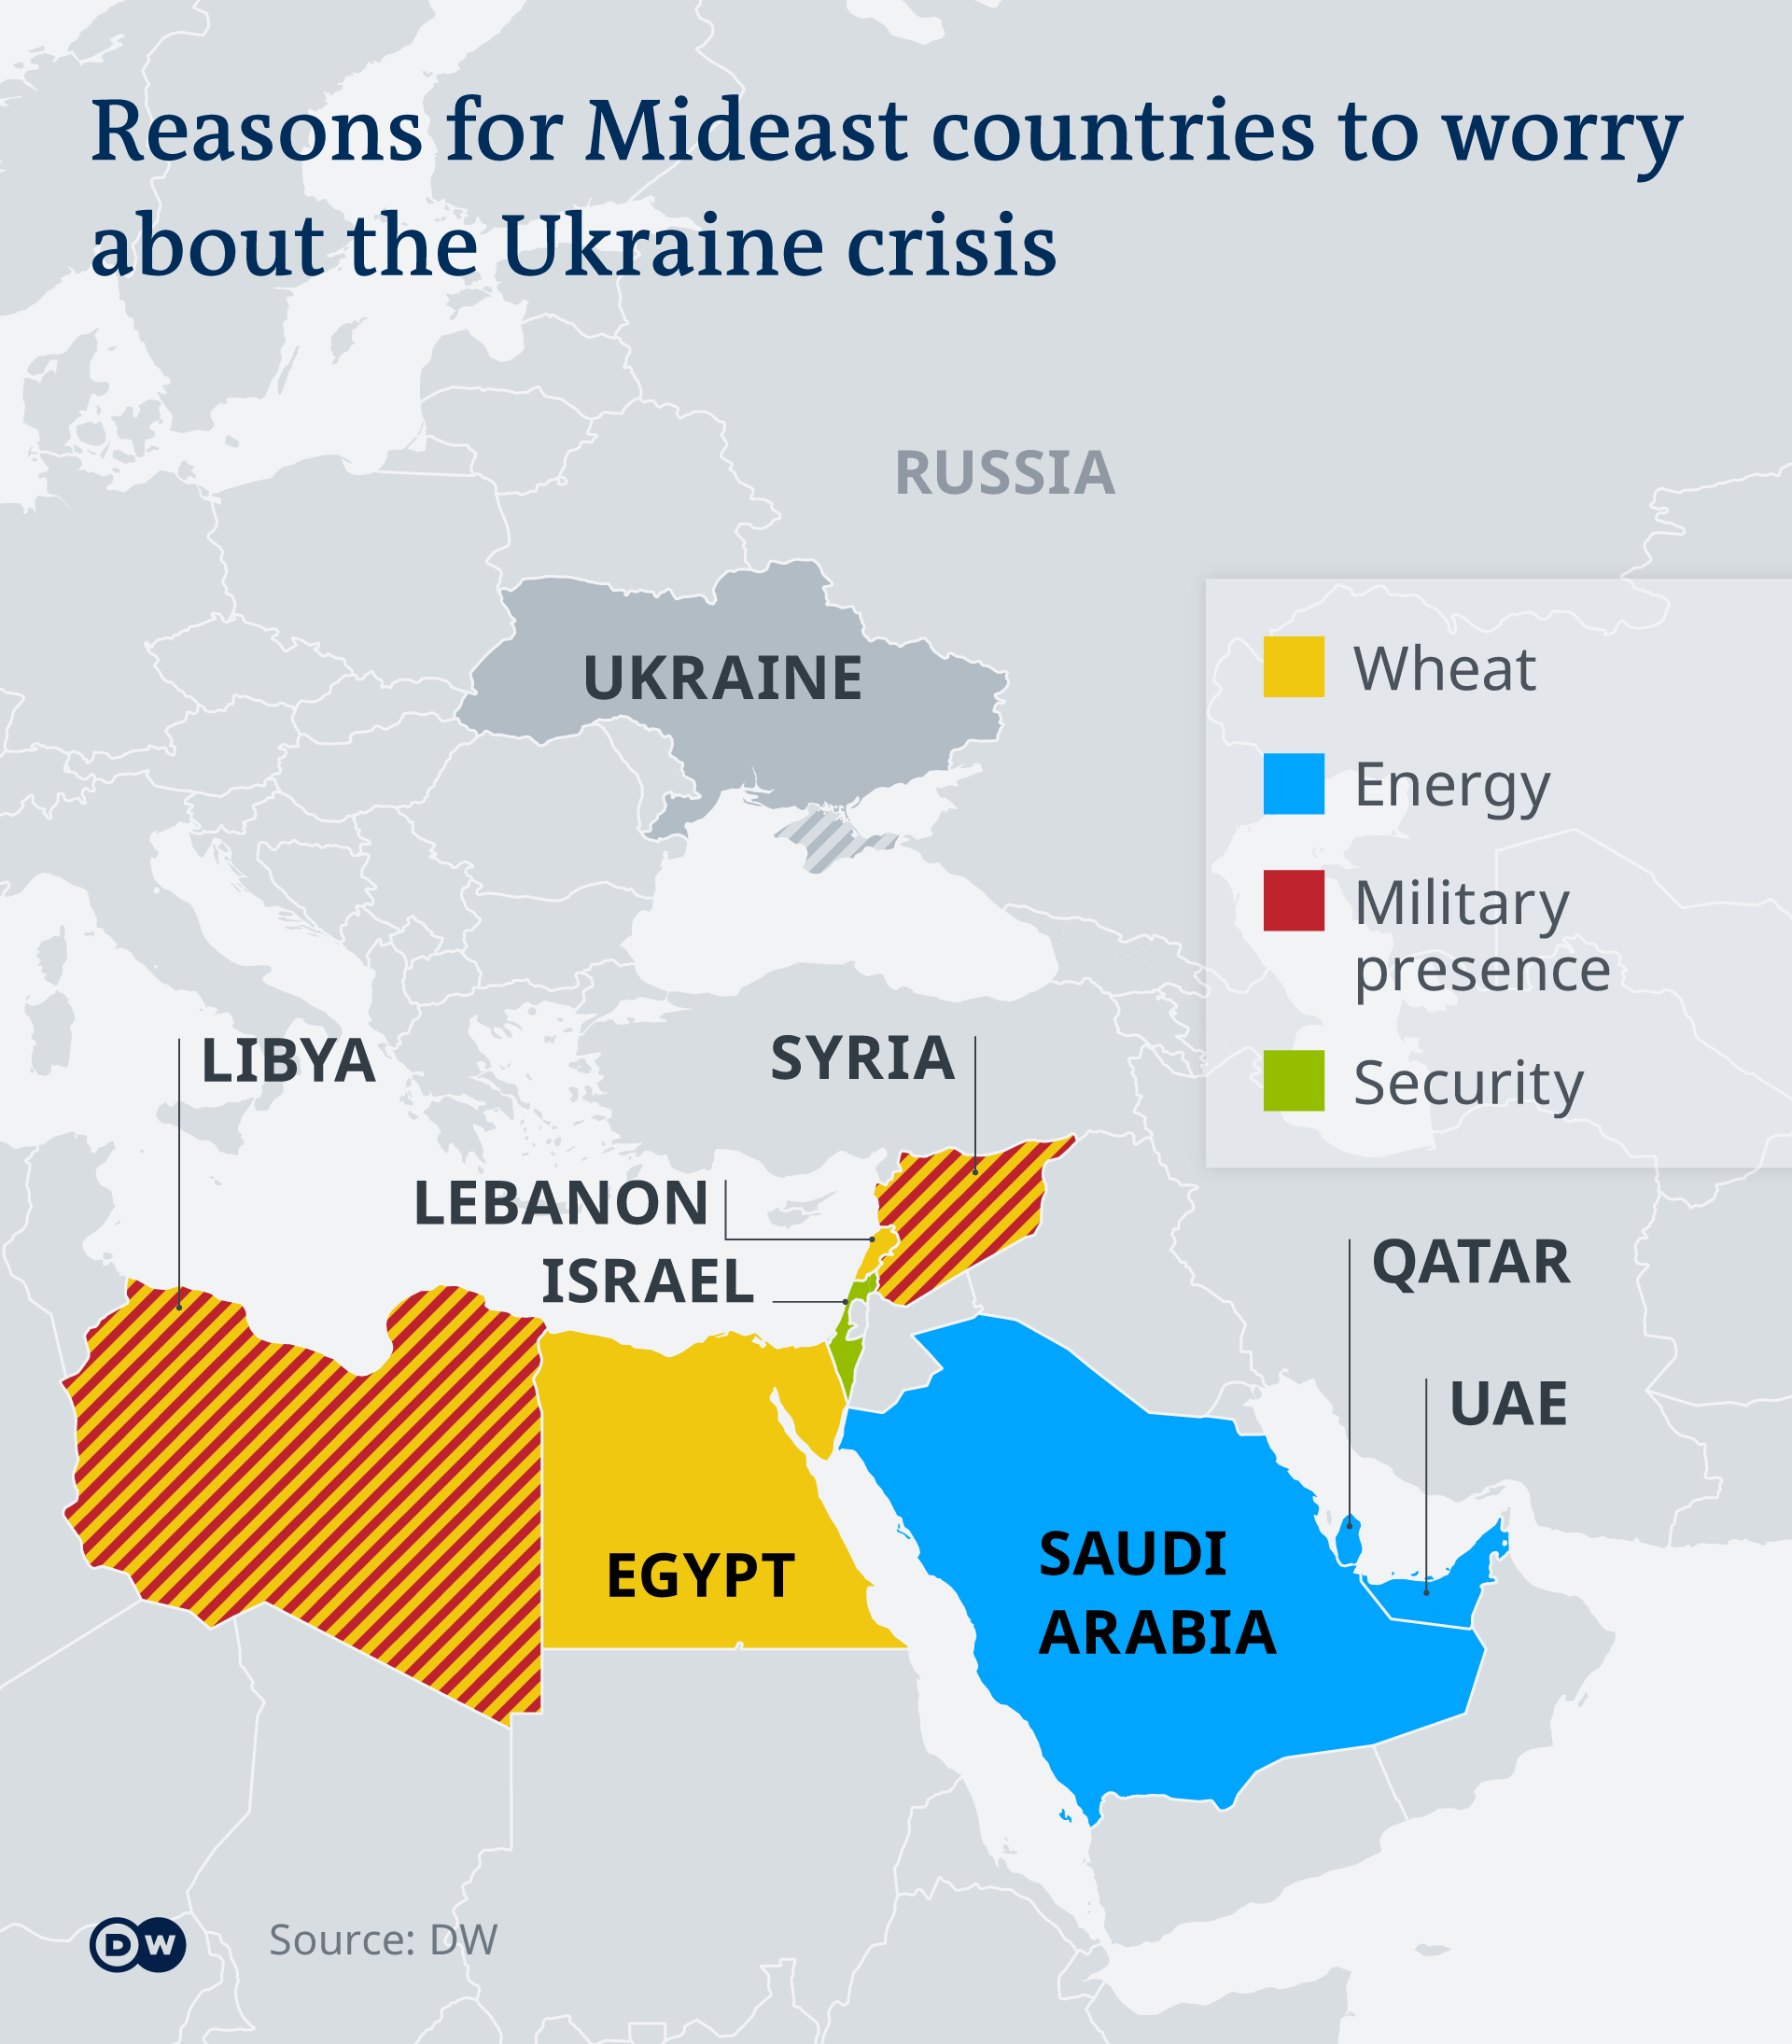 Graphic: Reasons Middle East countries are worried about the Ukraine crisis (source: DW)